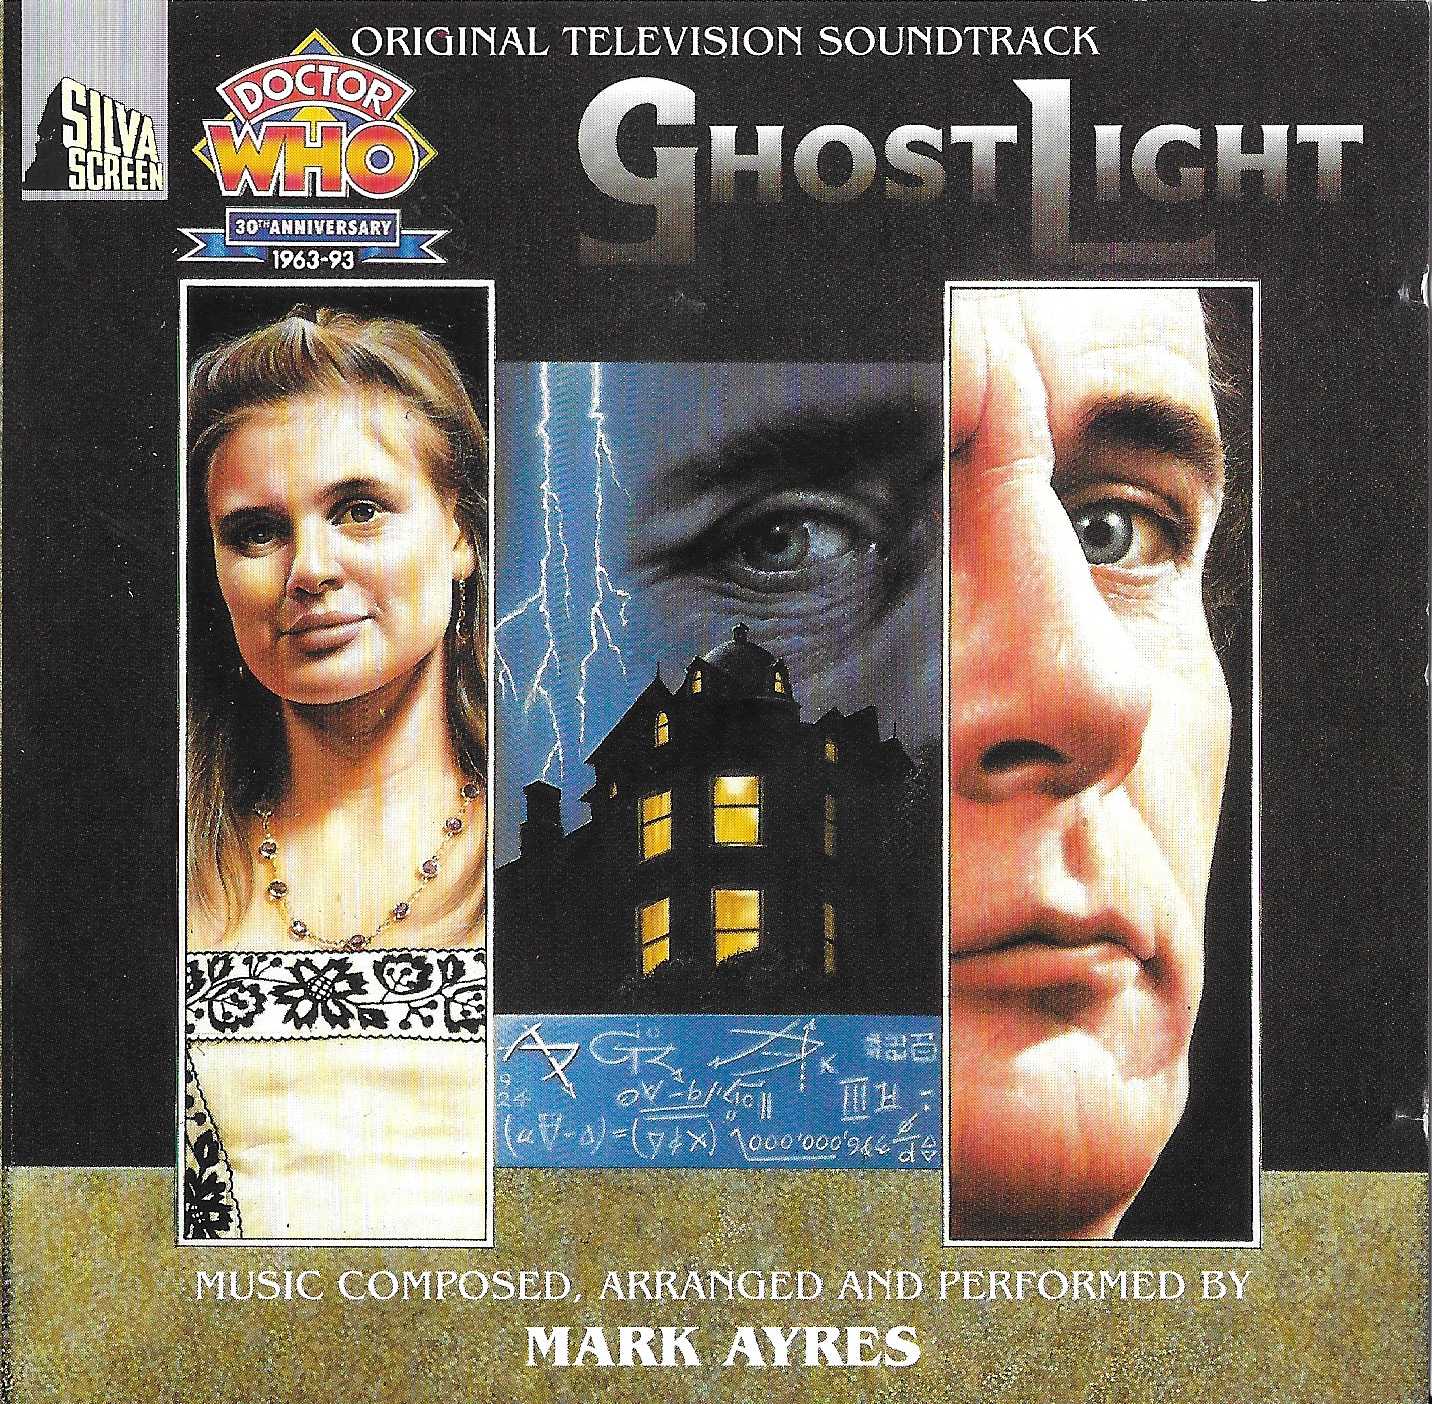 Picture of Doctor Who - Ghostlight by artist Mark Ayres from the BBC cds - Records and Tapes library